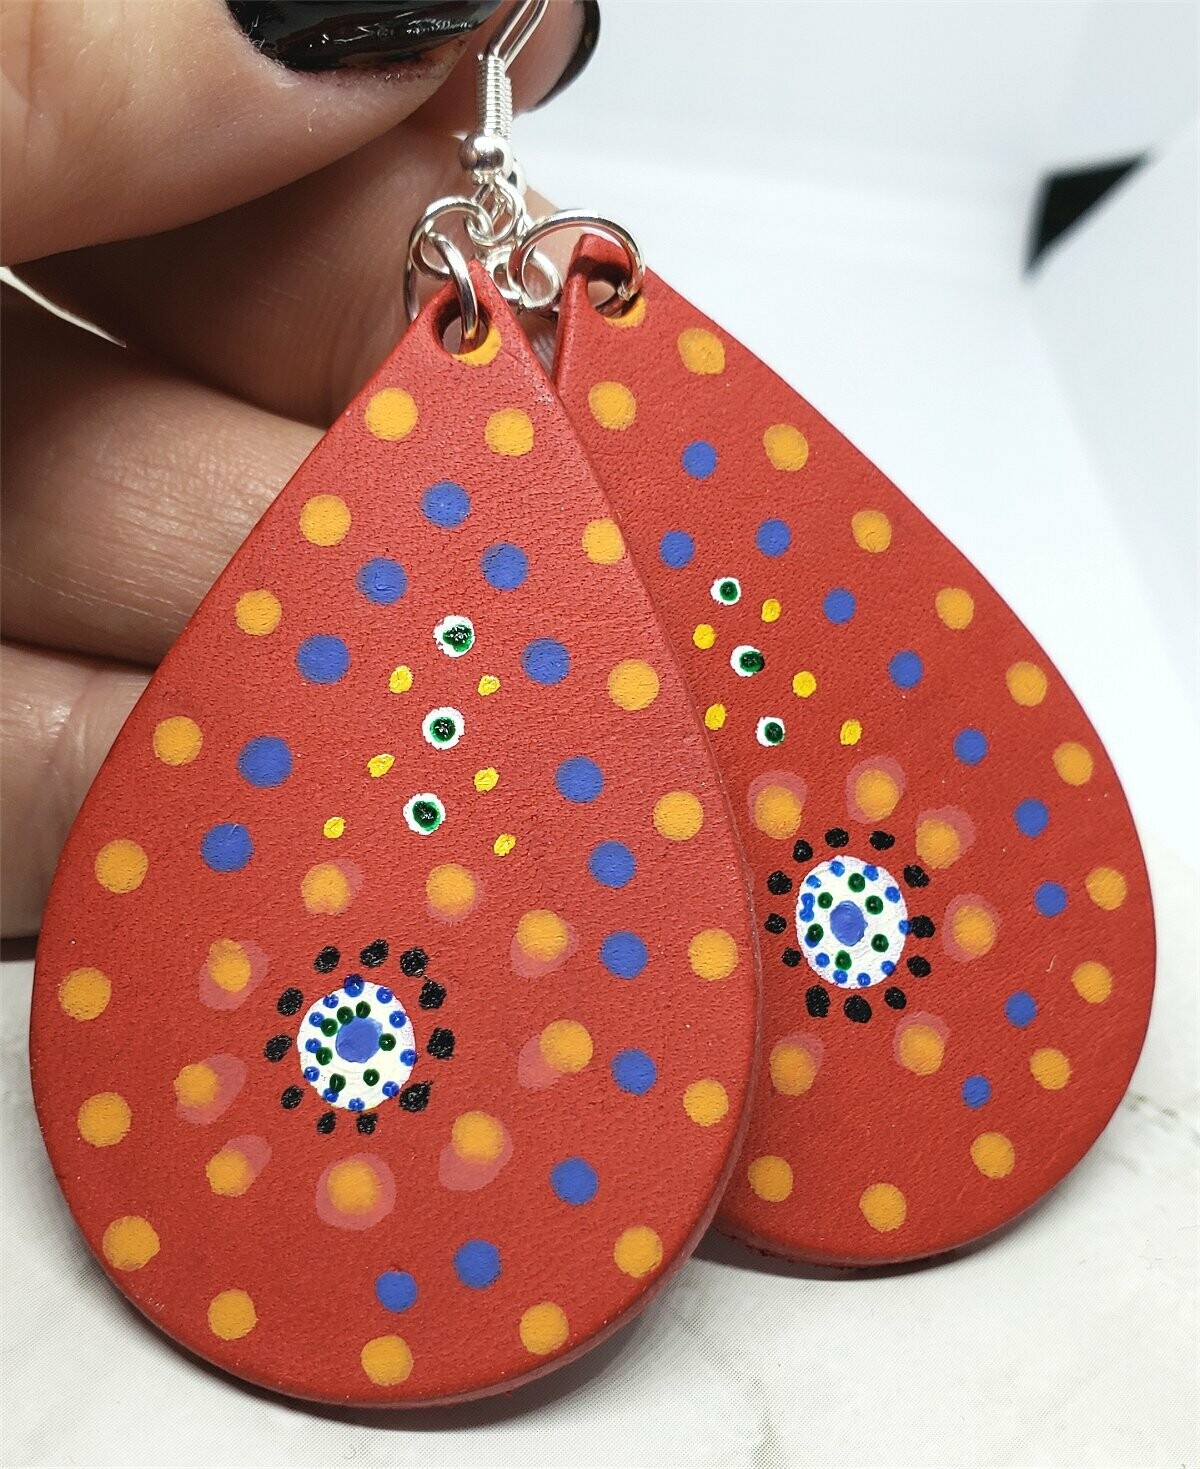 Aboriginal Style Dot Art Hand Painted on Red Real Leather Teardrop Shaped Earrings